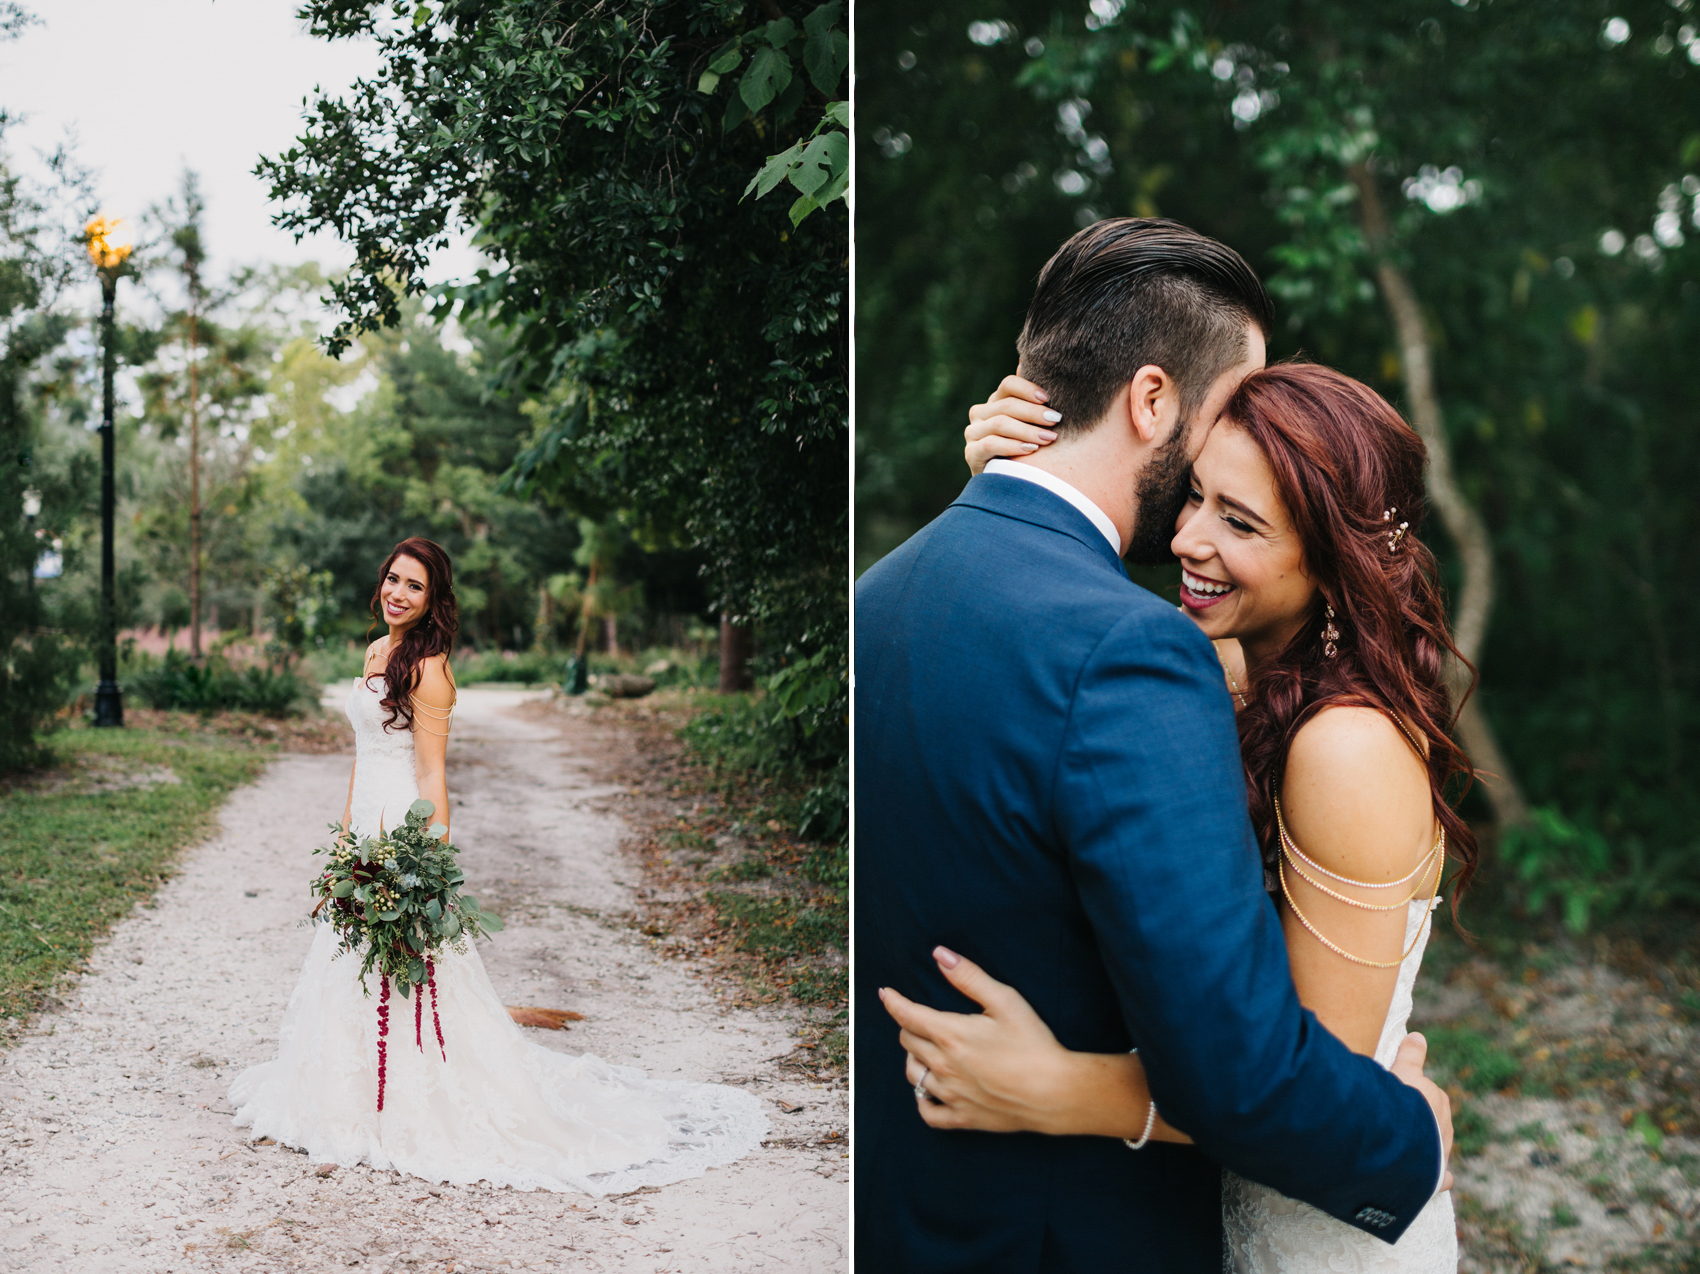 Natural candid wedding photography in Orlando at Mead Garden